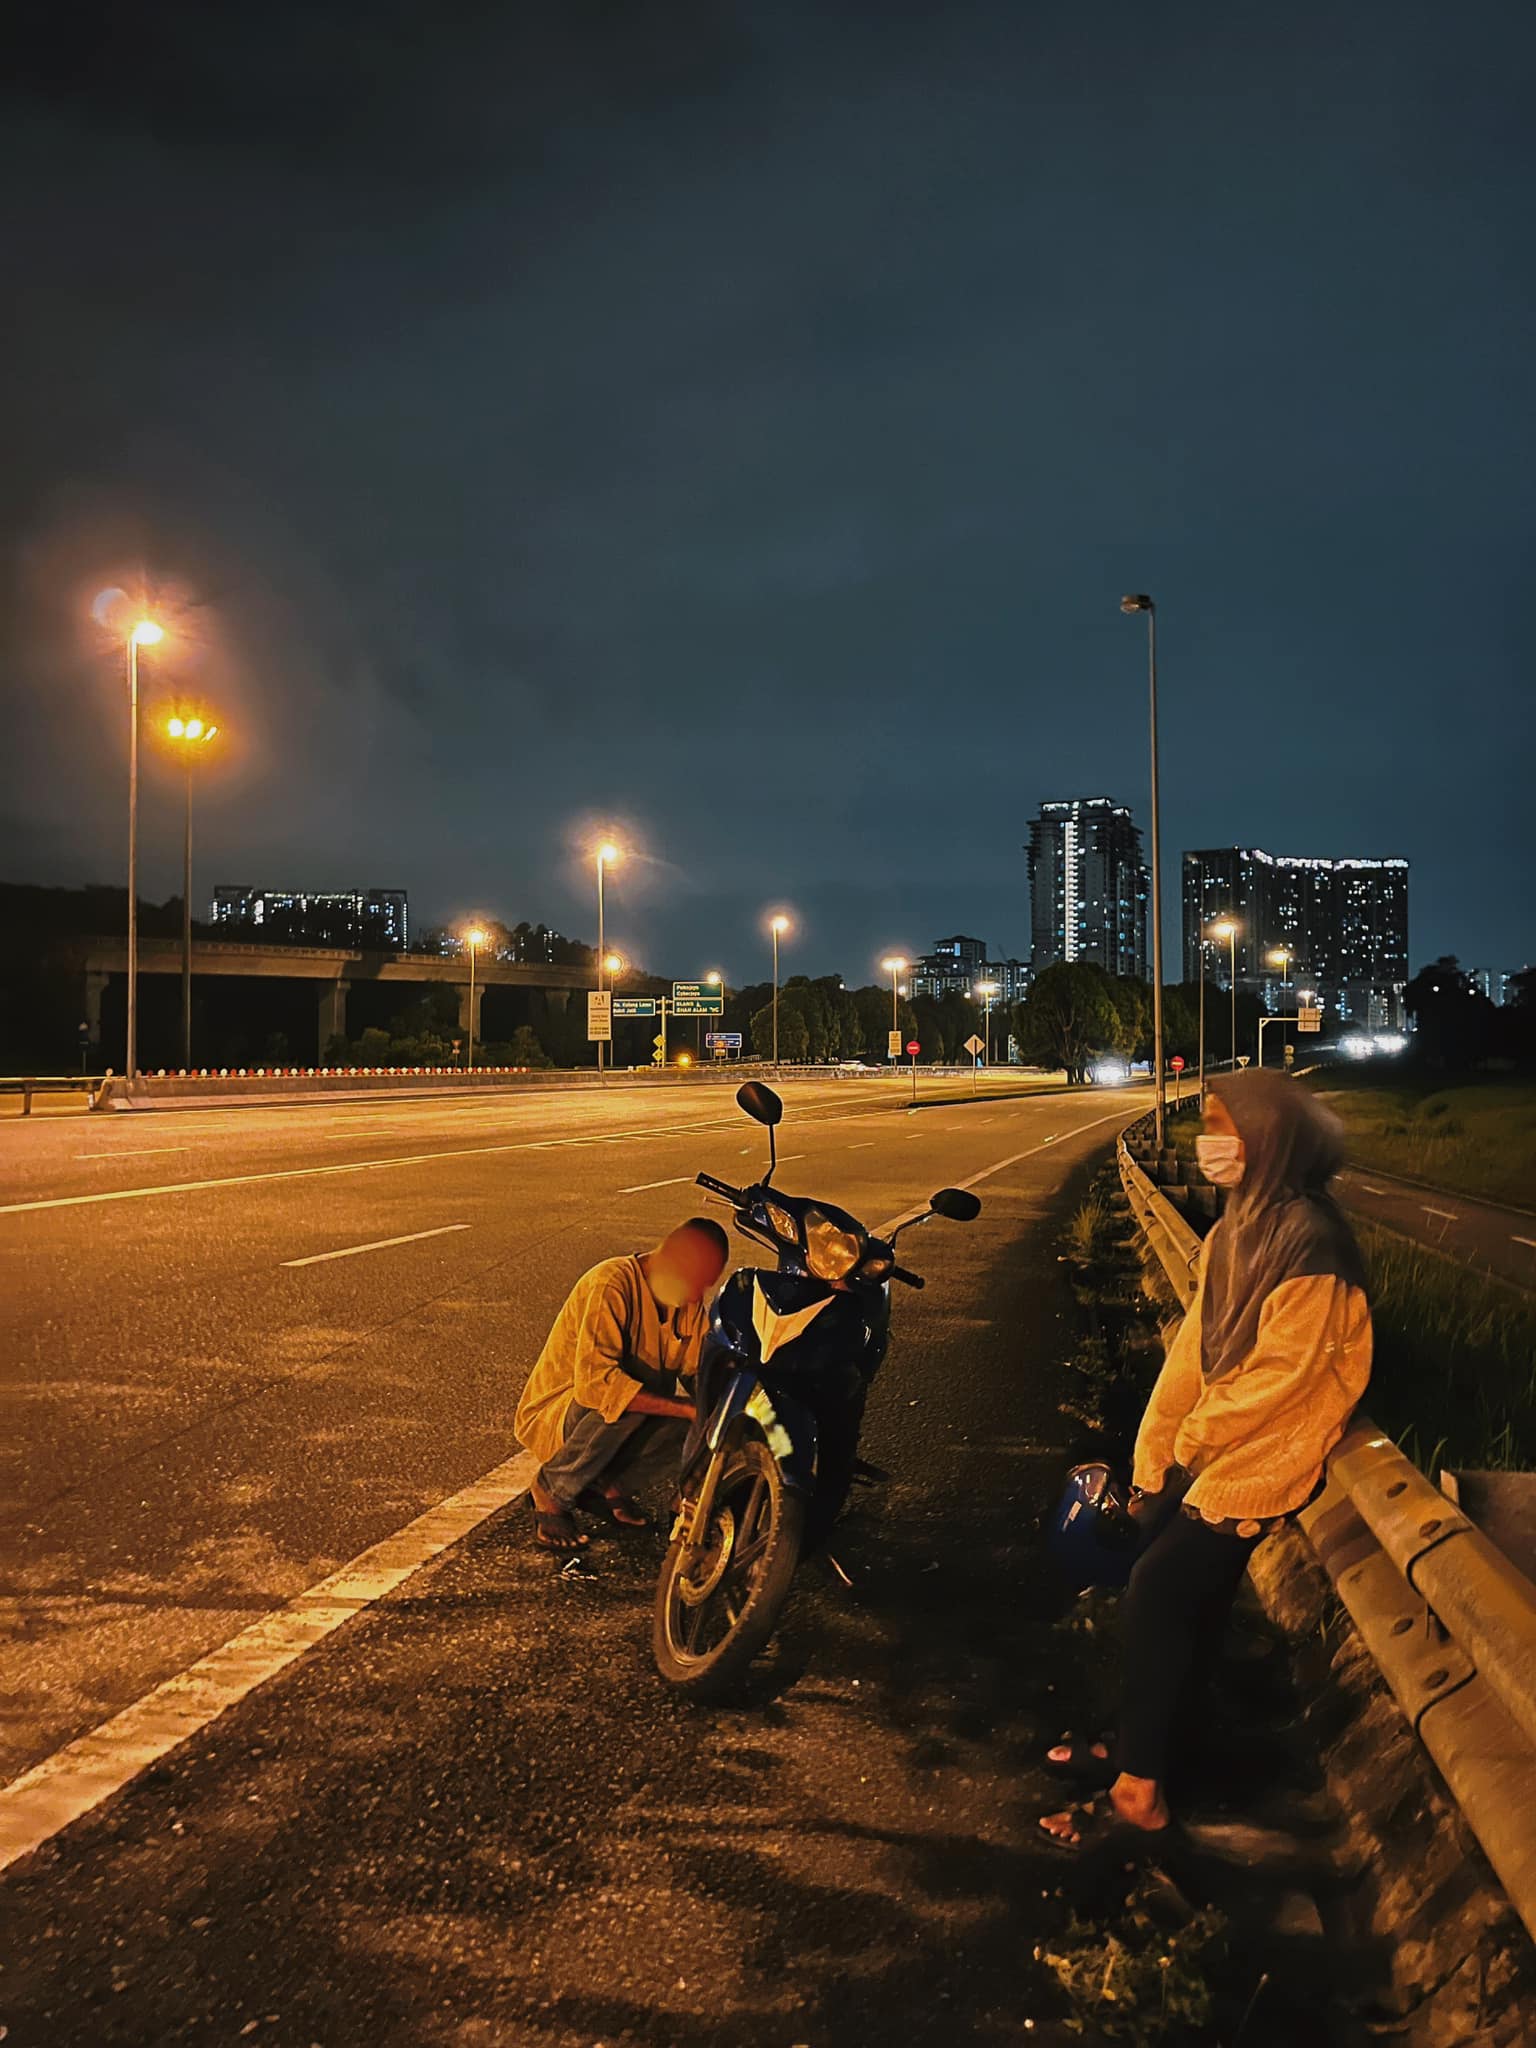 Both father and daughter had been left stranded on the highway when their motorbike ran out of motor oil. Source: Alessandra Ng